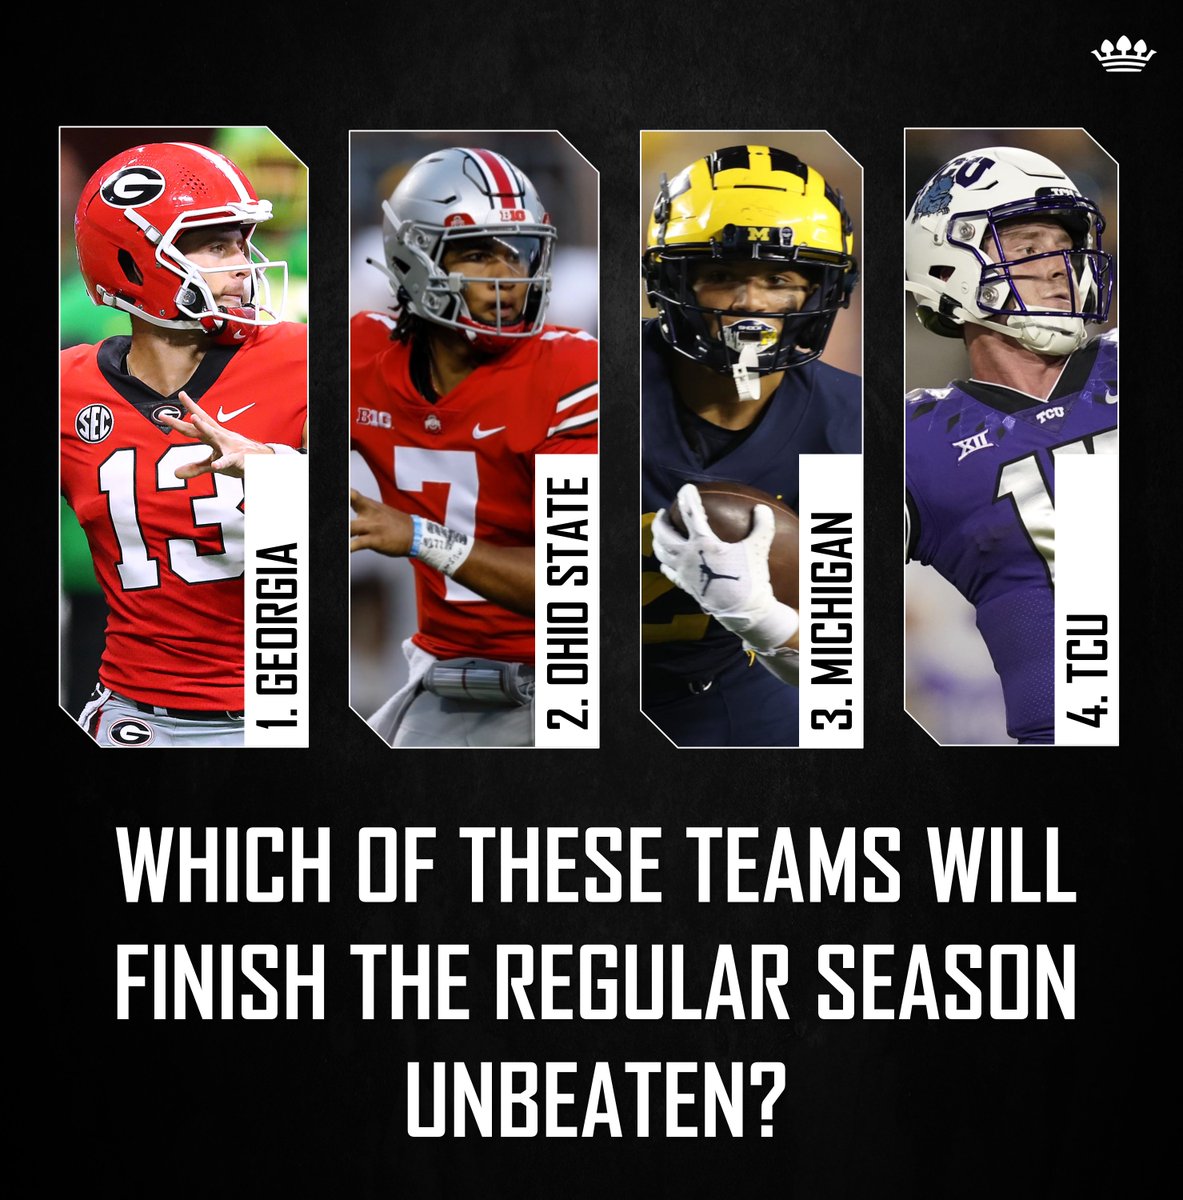 The final four unbeaten teams complete the top four of the latest College Football Playoff rankings.

#collegefootball #ncaa #ncaafootball  #collegefootballplayoff #cfp #undefeated #georgia #bulldogs #ohiostate #buckeyes #michigan #wolverines #tcu #hornedfrogs #football https://t.co/PSZ8f8sRe4